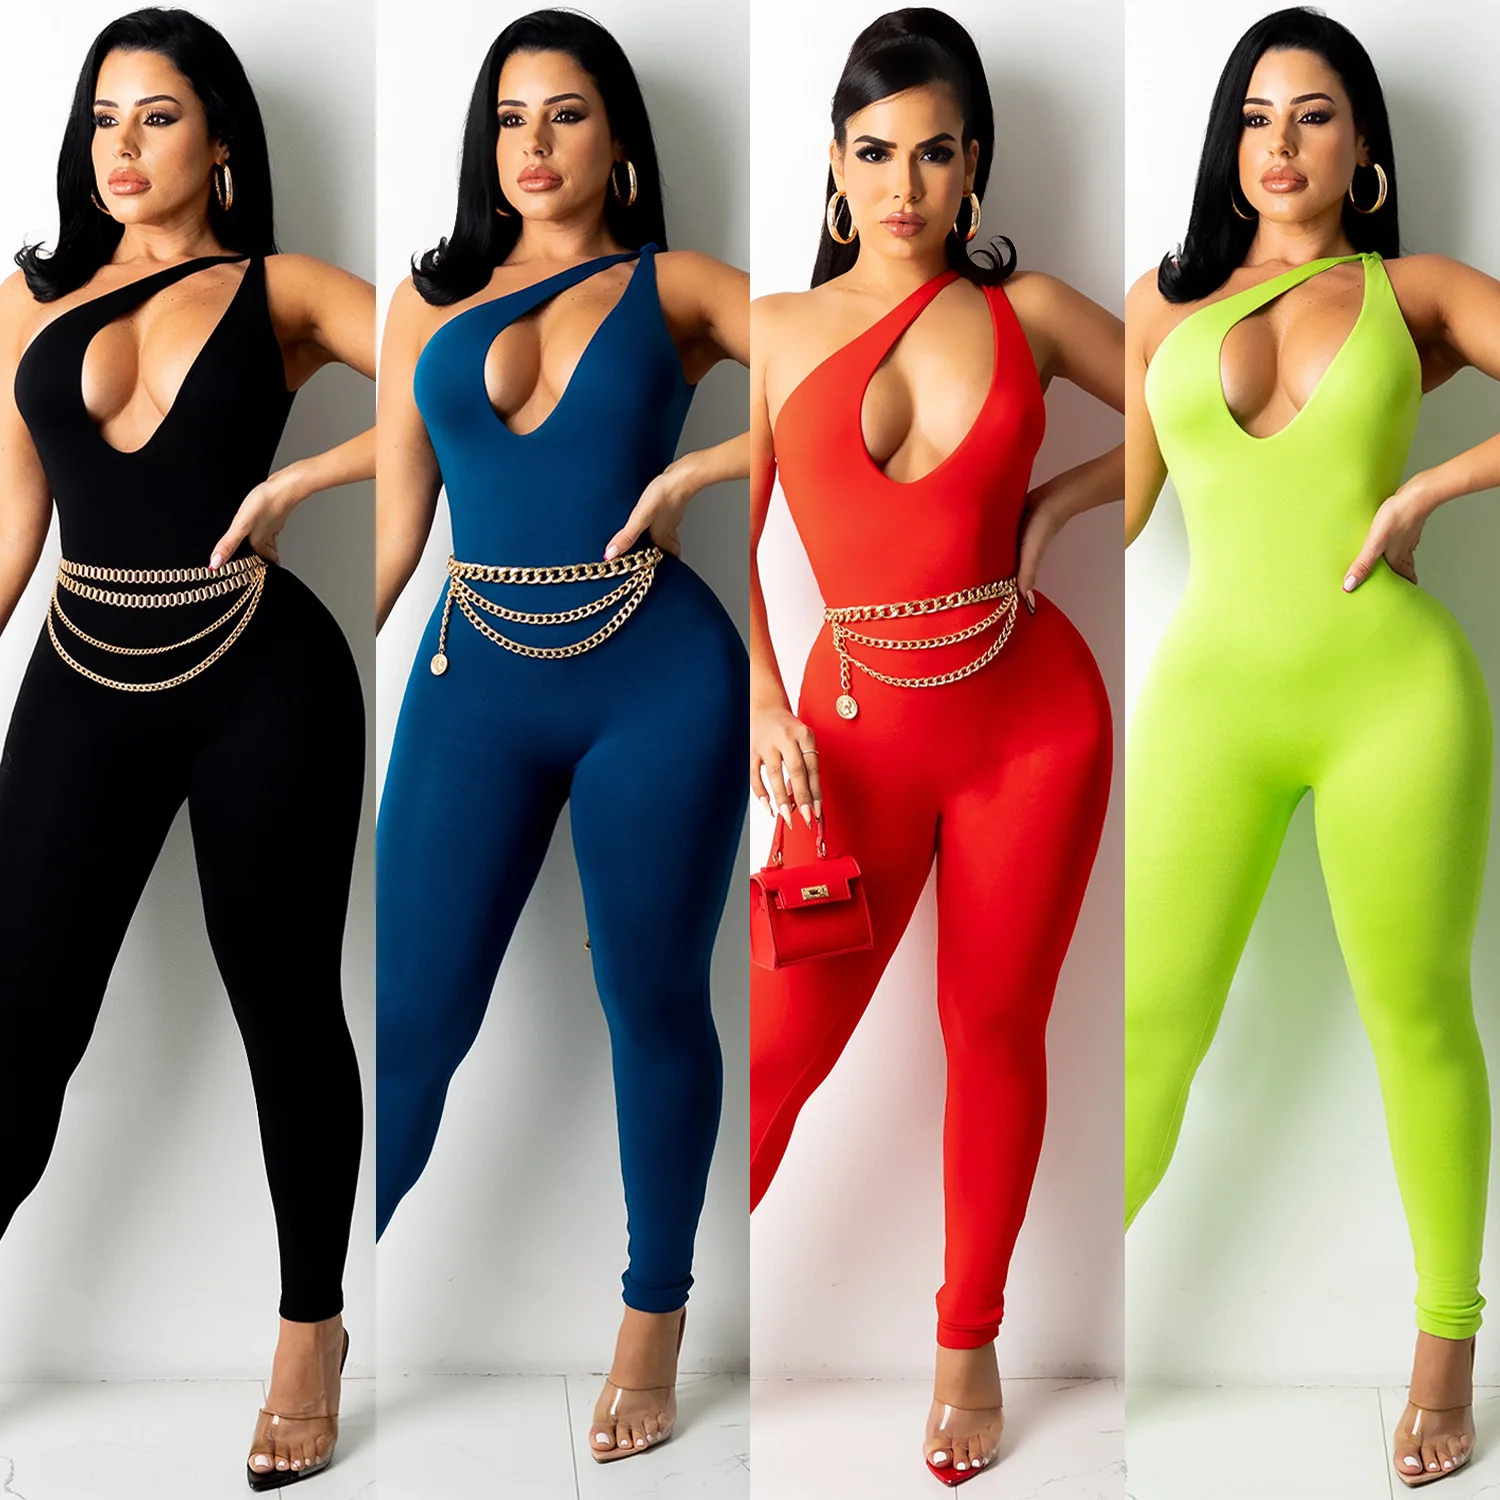 

F22076A Women's Solid Color Sleeveless Sexy Jumpsuits Slip Hollowed-Out Long Sleeve Nightclub Jumpsuits, Black, blue, red, green